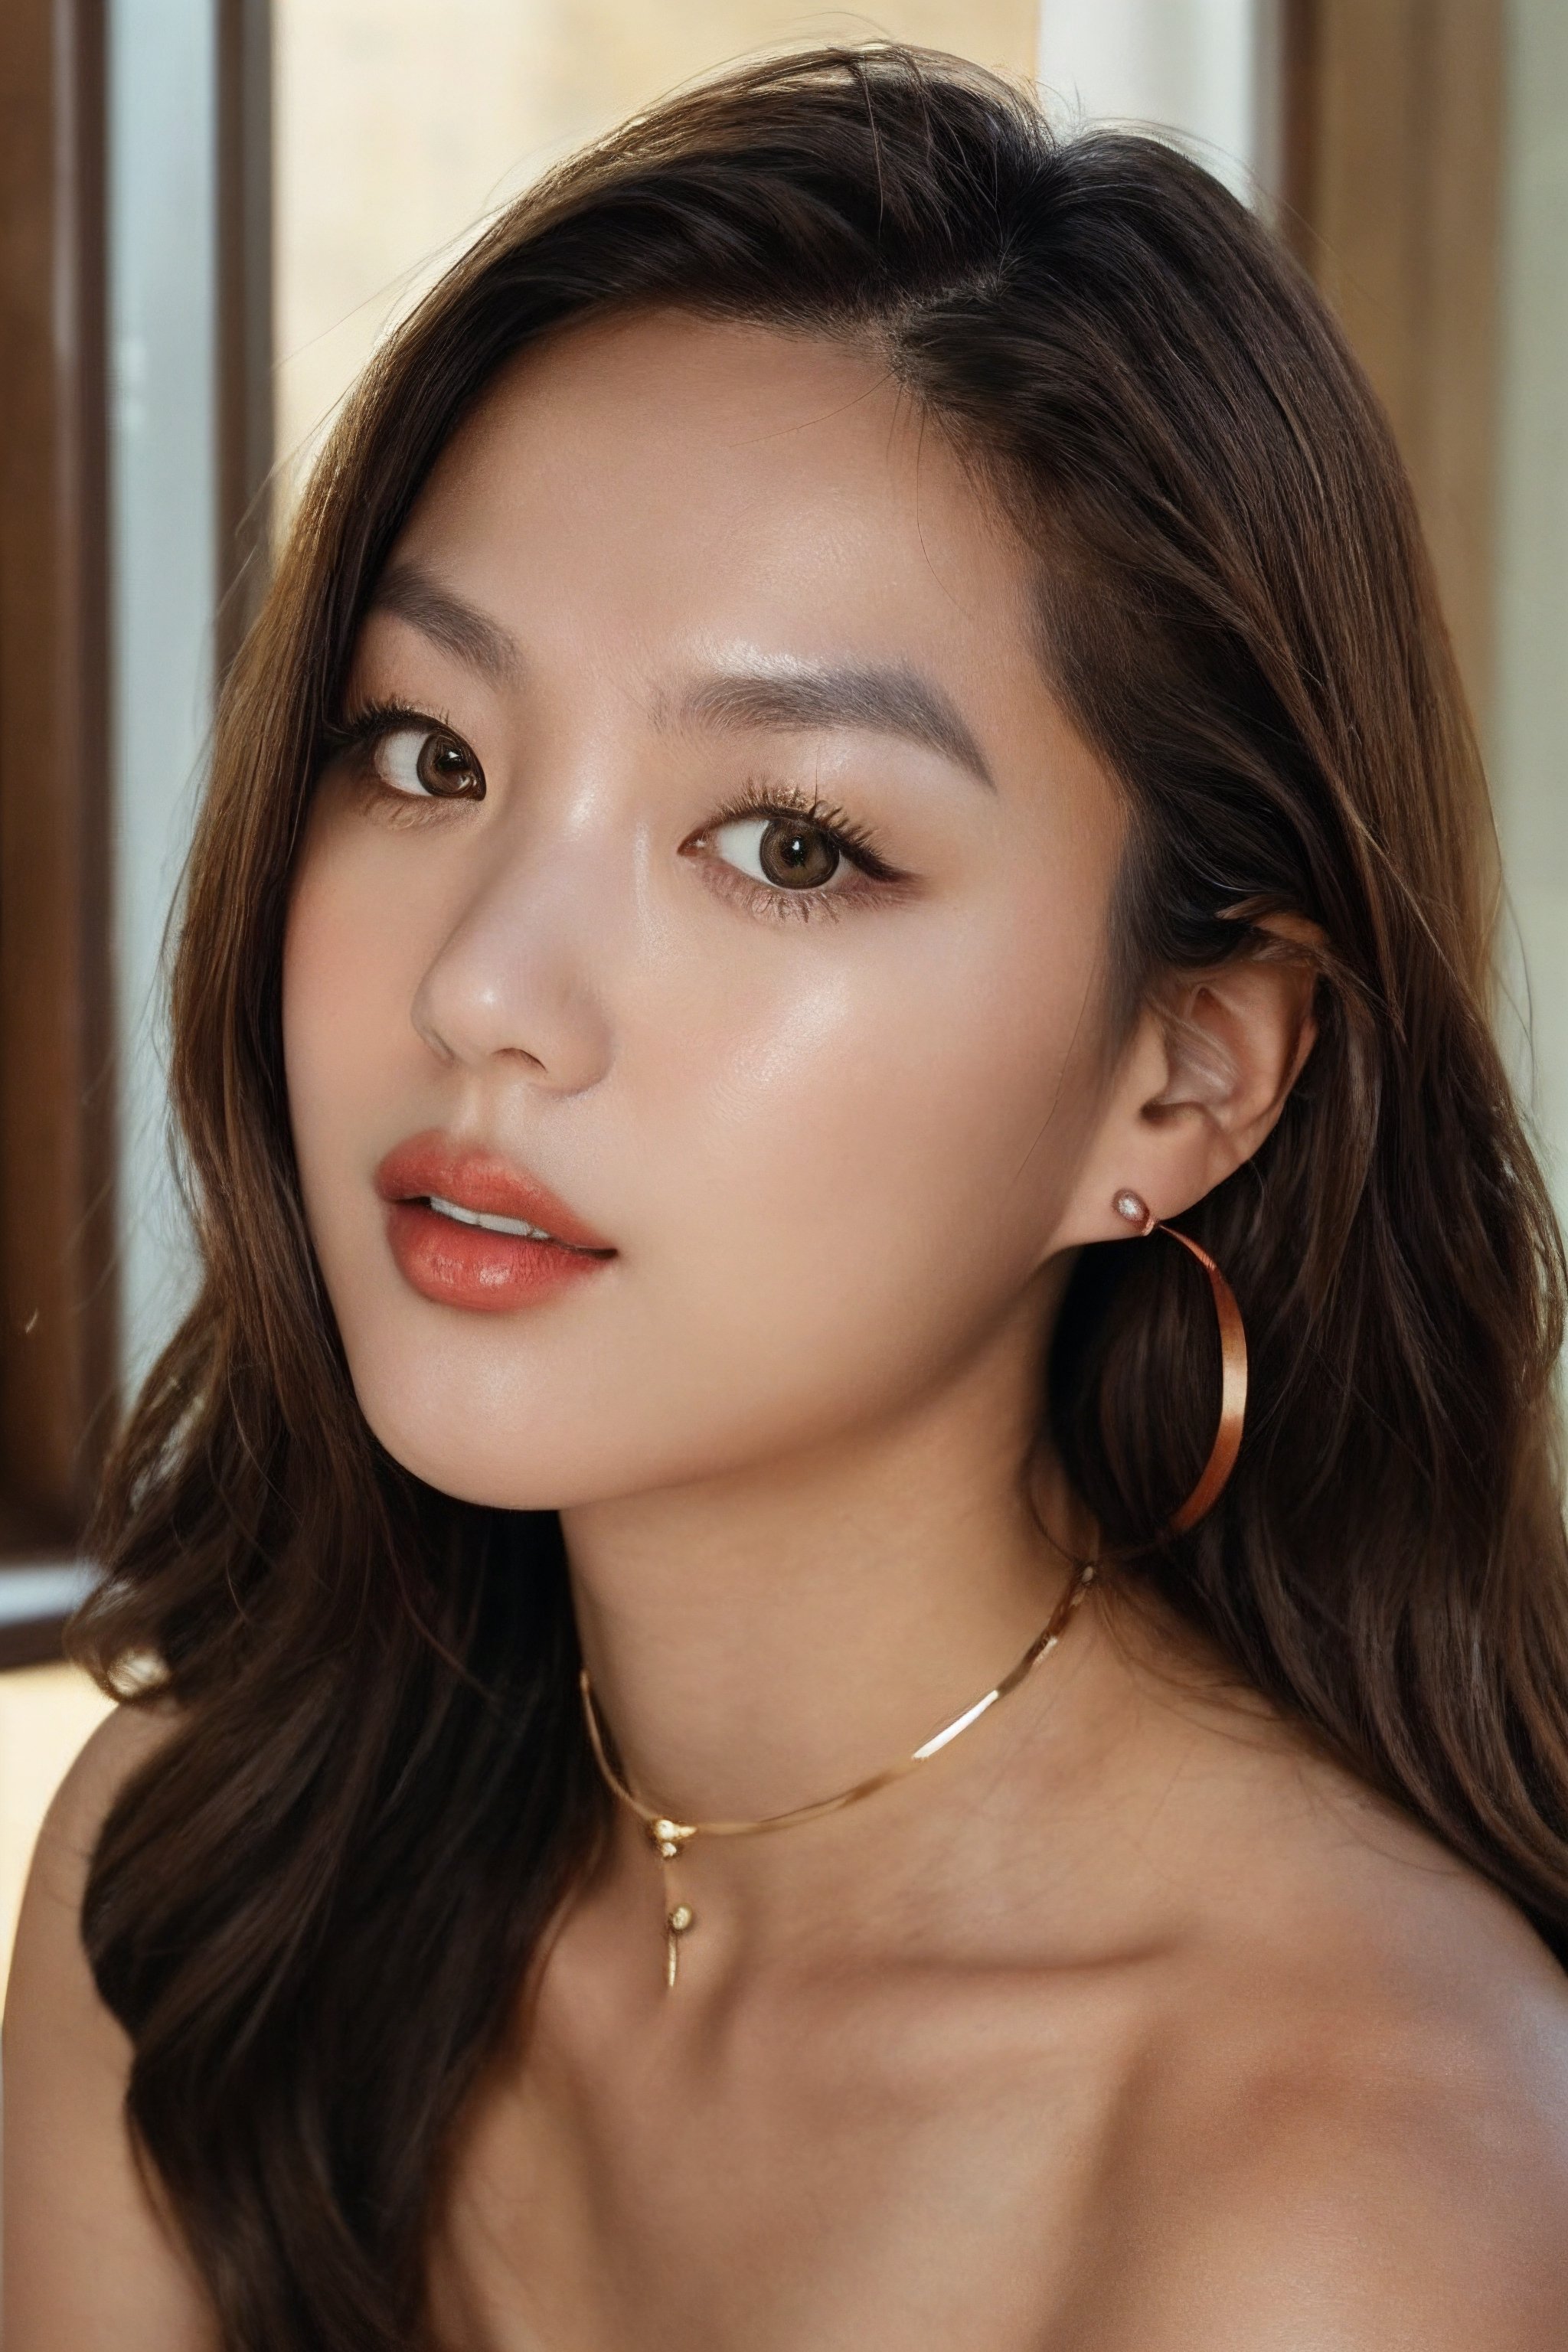 igirl, beautiful 22 year old Korean woman, close up, portrait, black choker, looking slightly away from camera,  dimly lit, sitting in a room by a window, bathed in golden sunlight, dark walls, stud earrings, women's watch,  best quality, amazing quality, very aesthetic, (petite), insanely detailed eyes, insanely detailed face, insanely detaled lips, insanely detailed hands, insanely detailed hair,  insanely detailed skin, long light brown hair, brown eyes, red lipstick